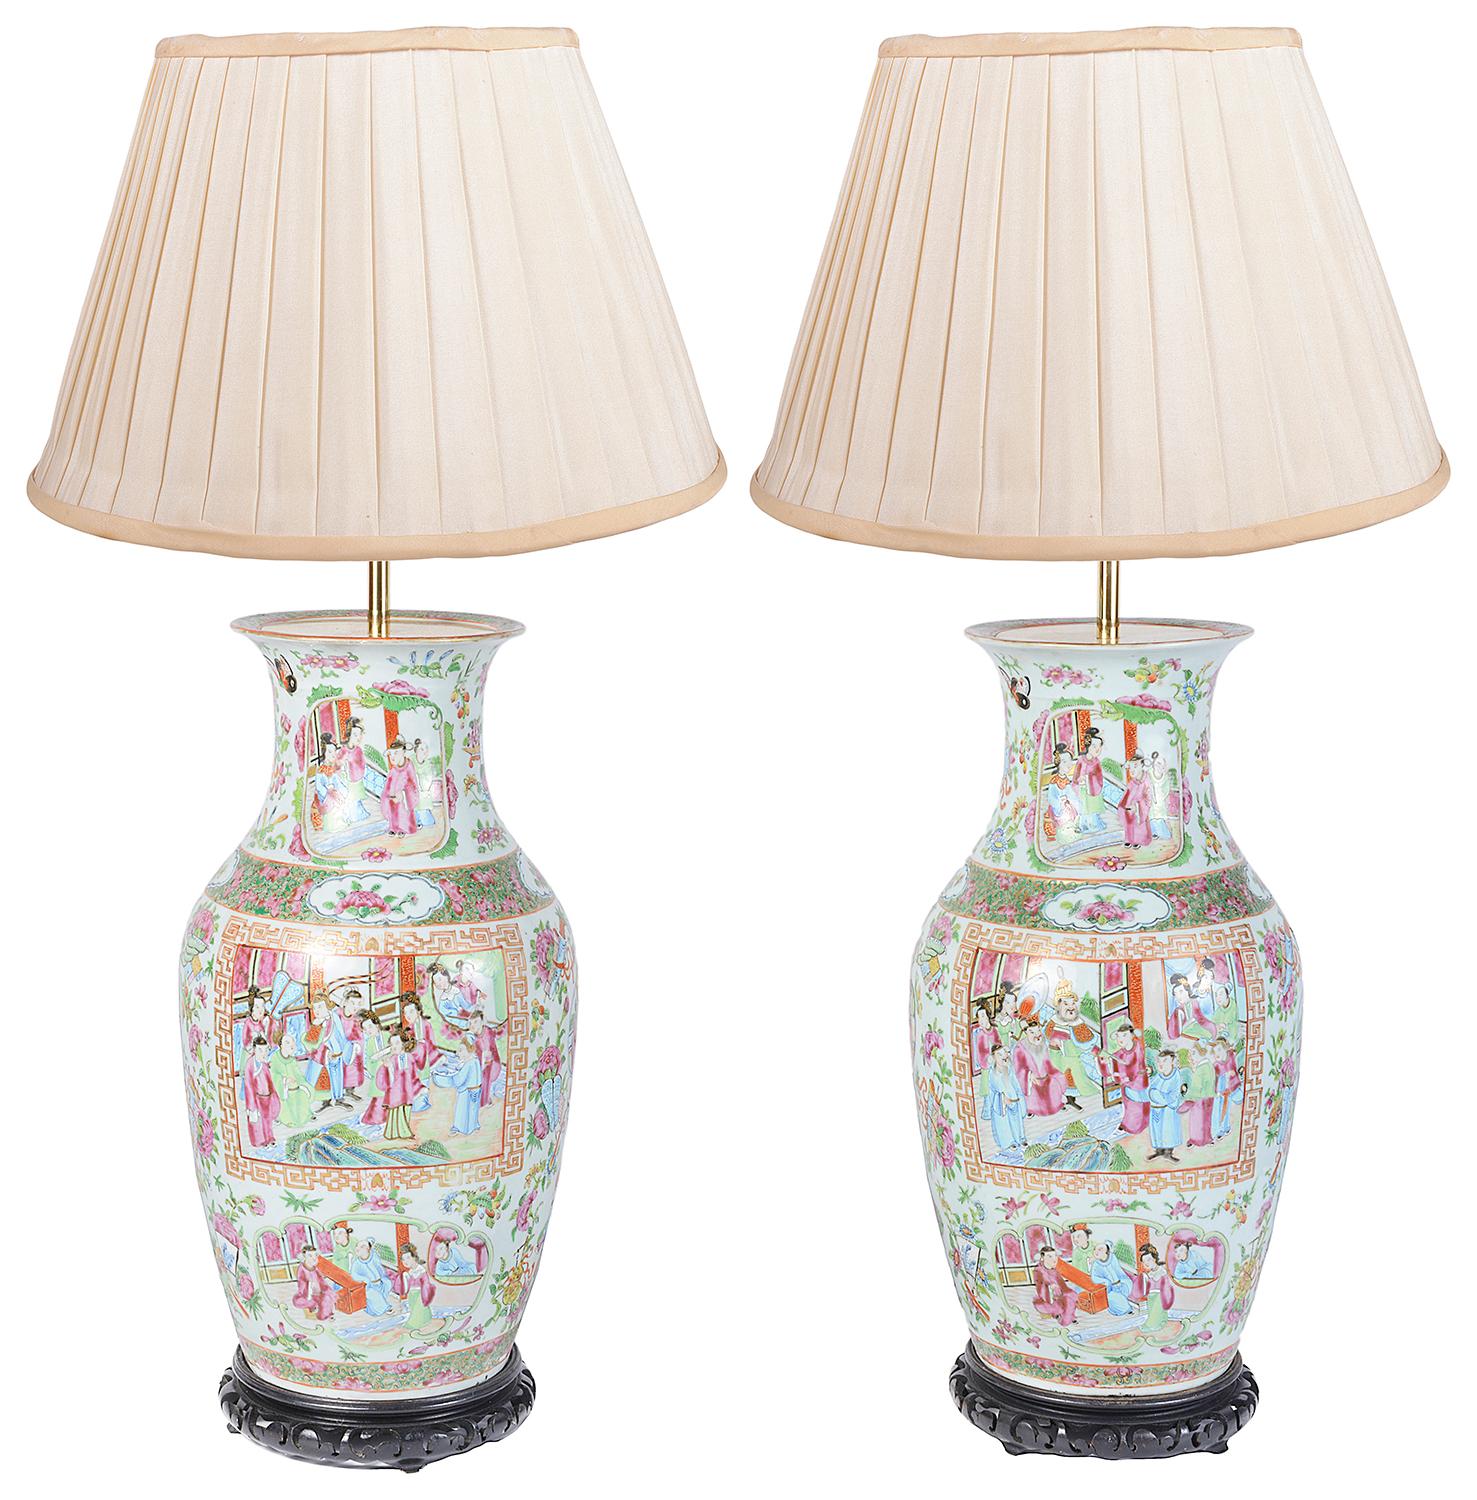 Pair of 19th Century Chinese Rose Medallion Vases or Lamps